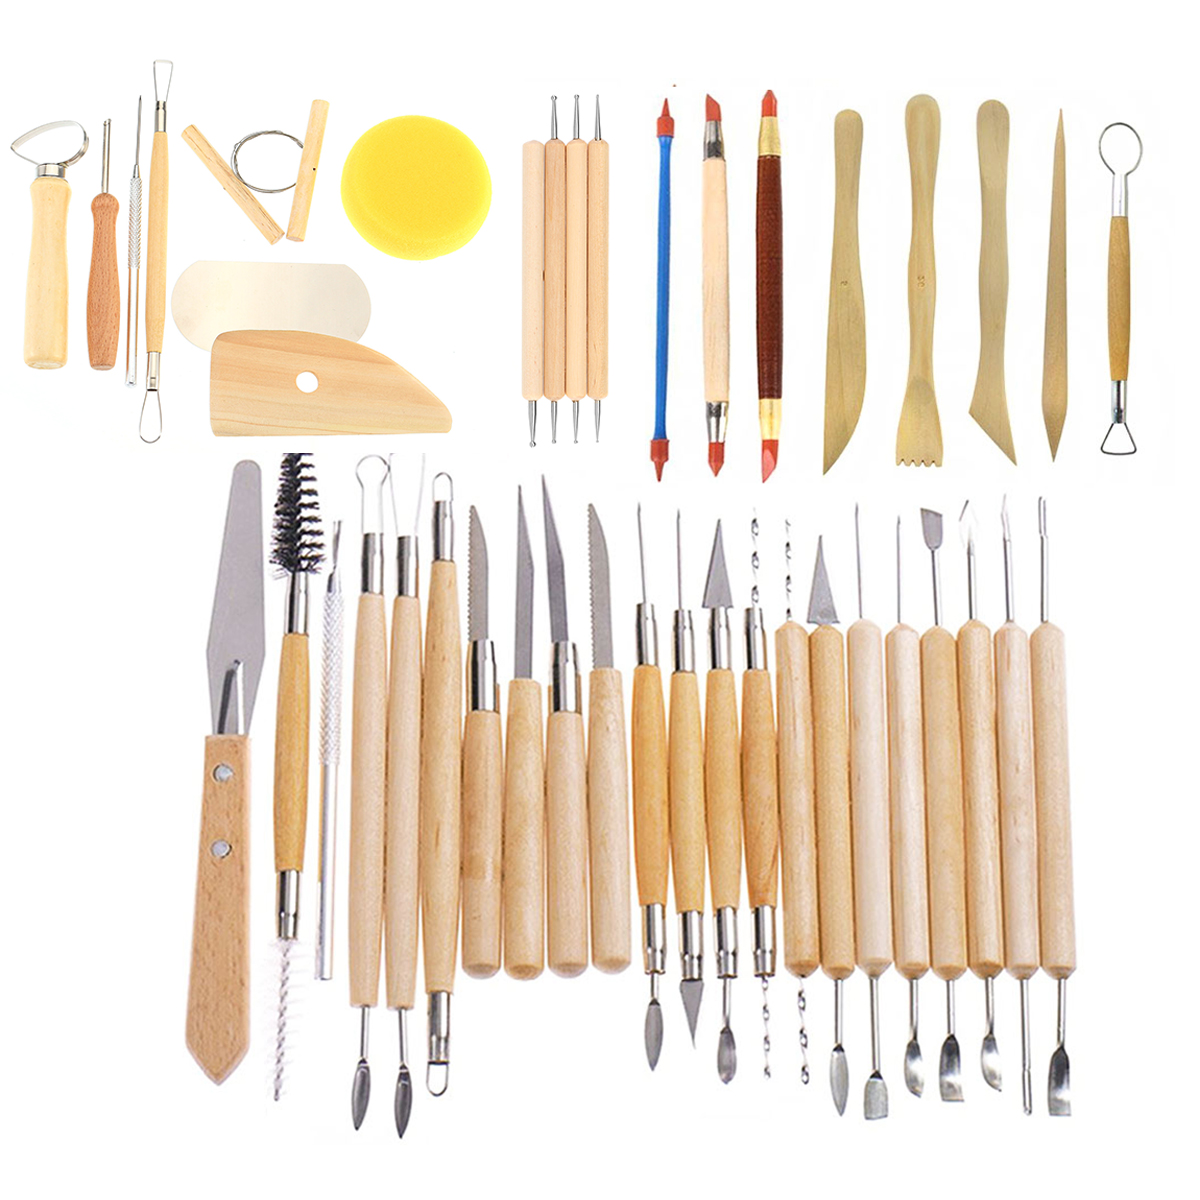 

42Pcs Wooden Clay Sculpting Tools Pottery Carving Tool Set Modeling Craft Hobby